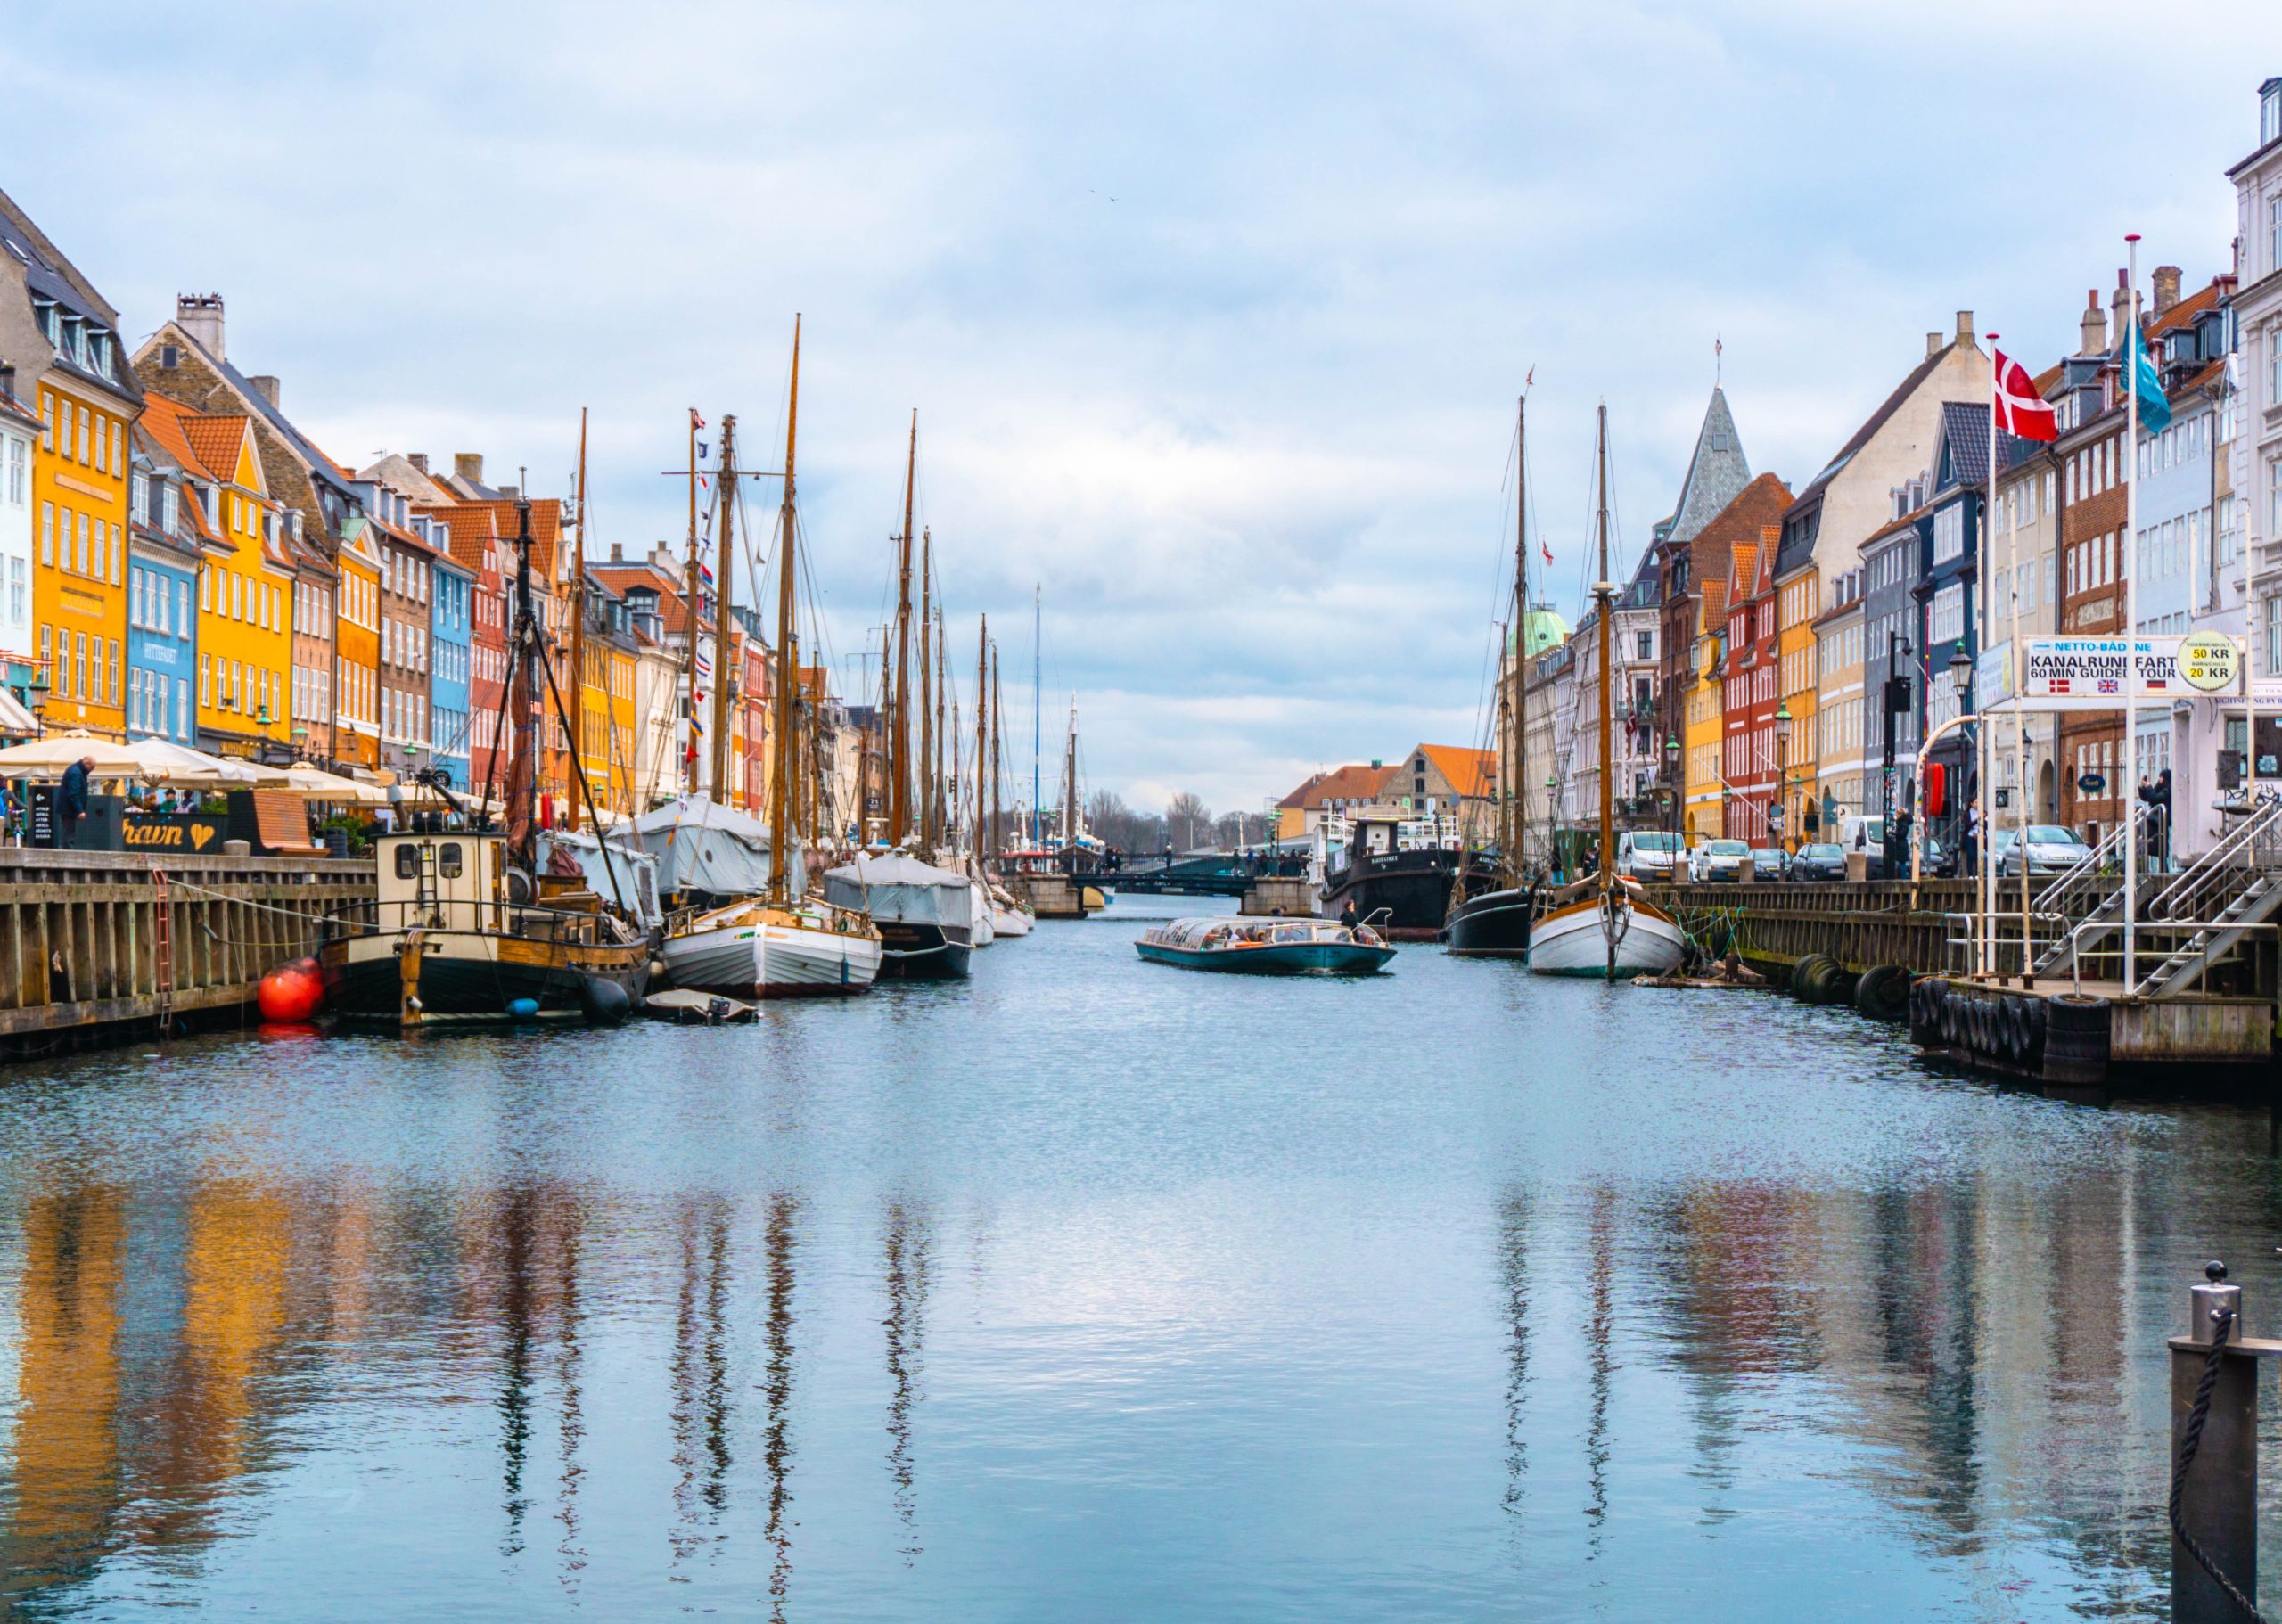 You can now travel through beautiful Denmark with five 